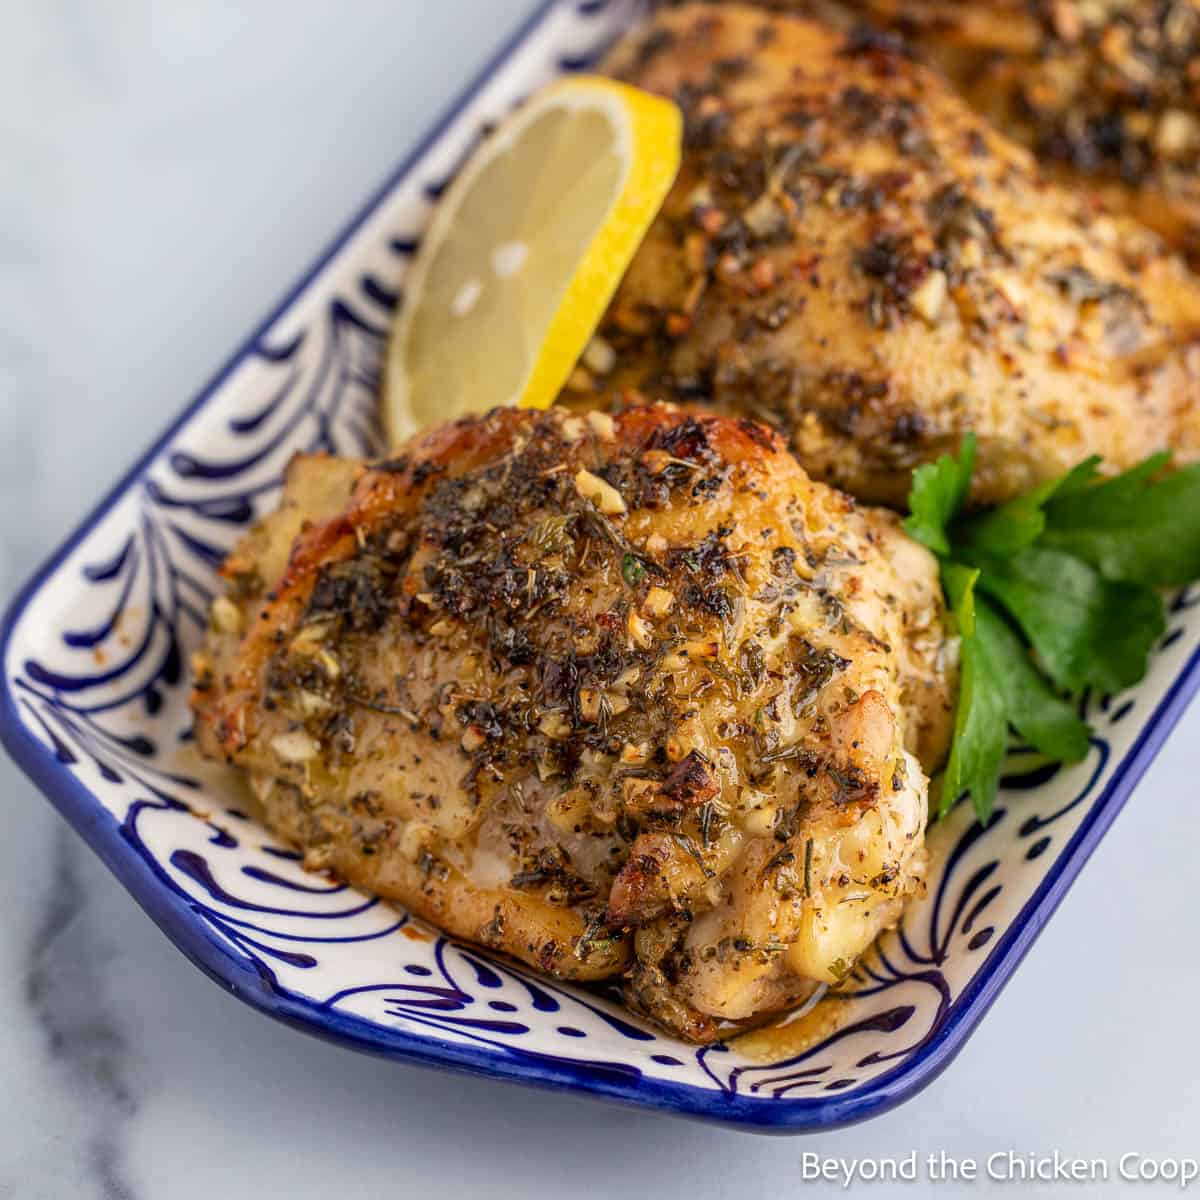 Baked Greek Chicken with sliced lemon on a colorful platter.